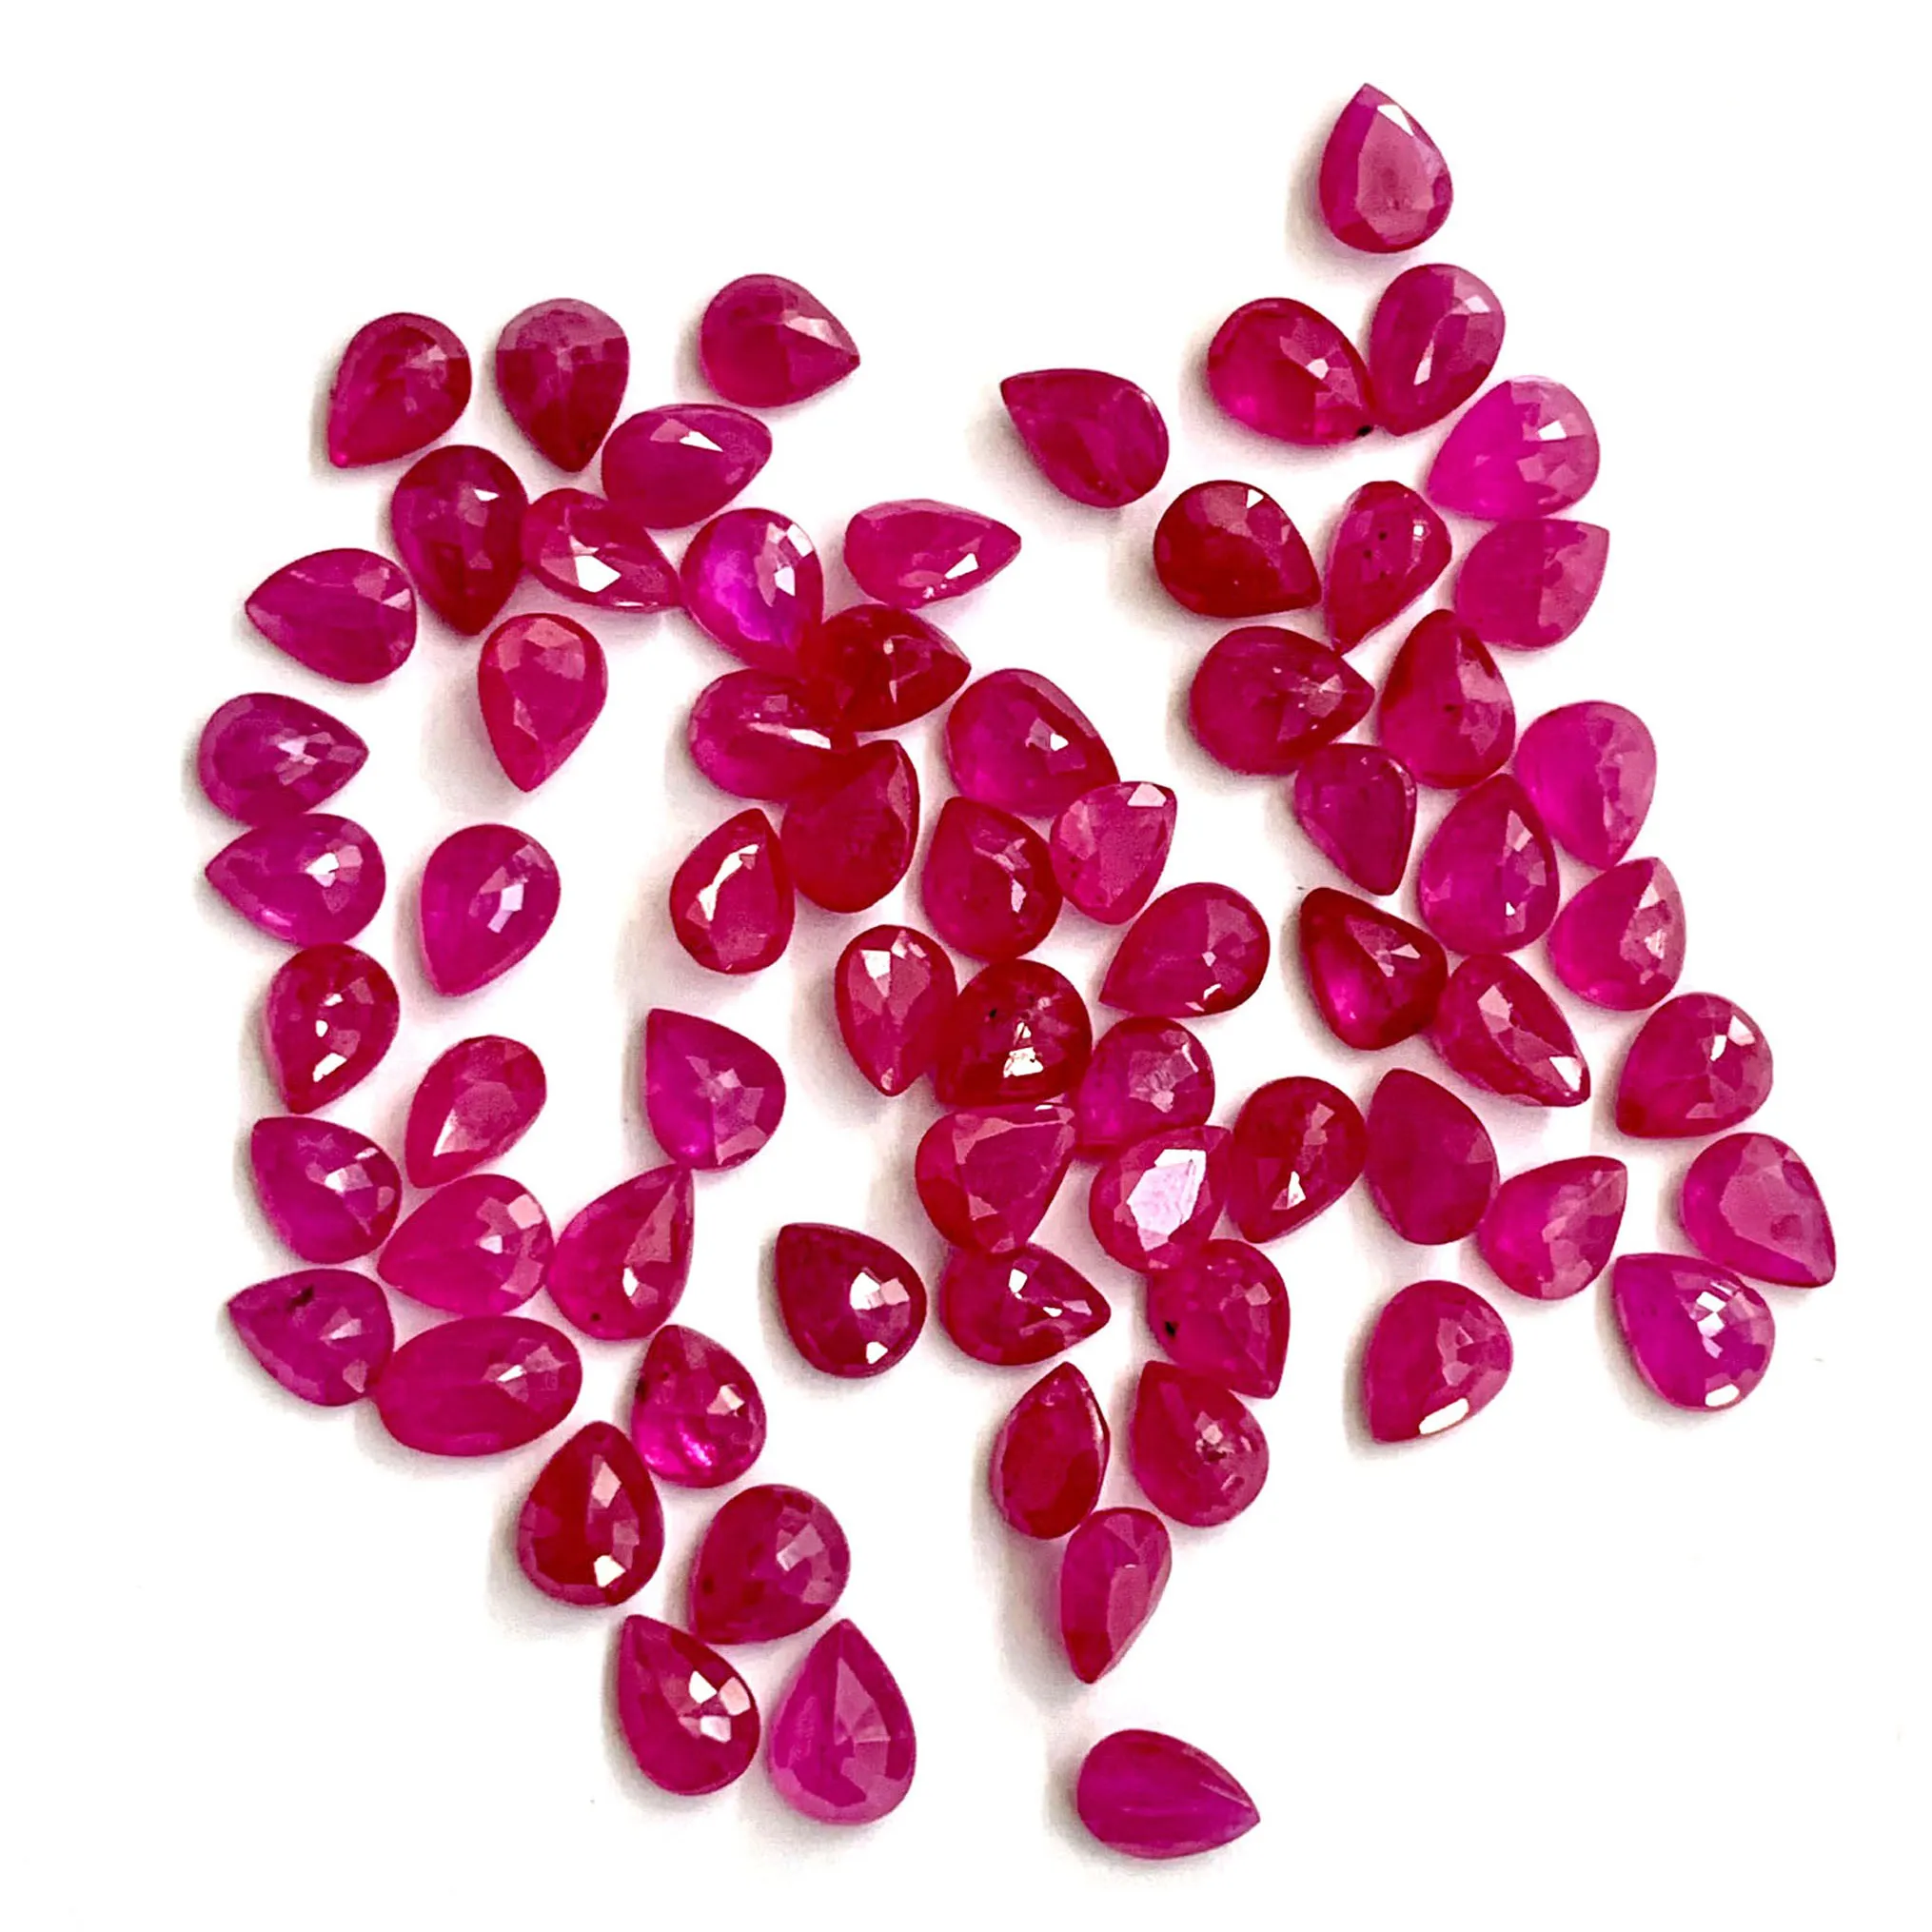 5x4mm Natural Ruby Gemstone Faceted Pears Loose Precious Gemstone Wholesale Price Natural Loose Good Quality Stone Low Price